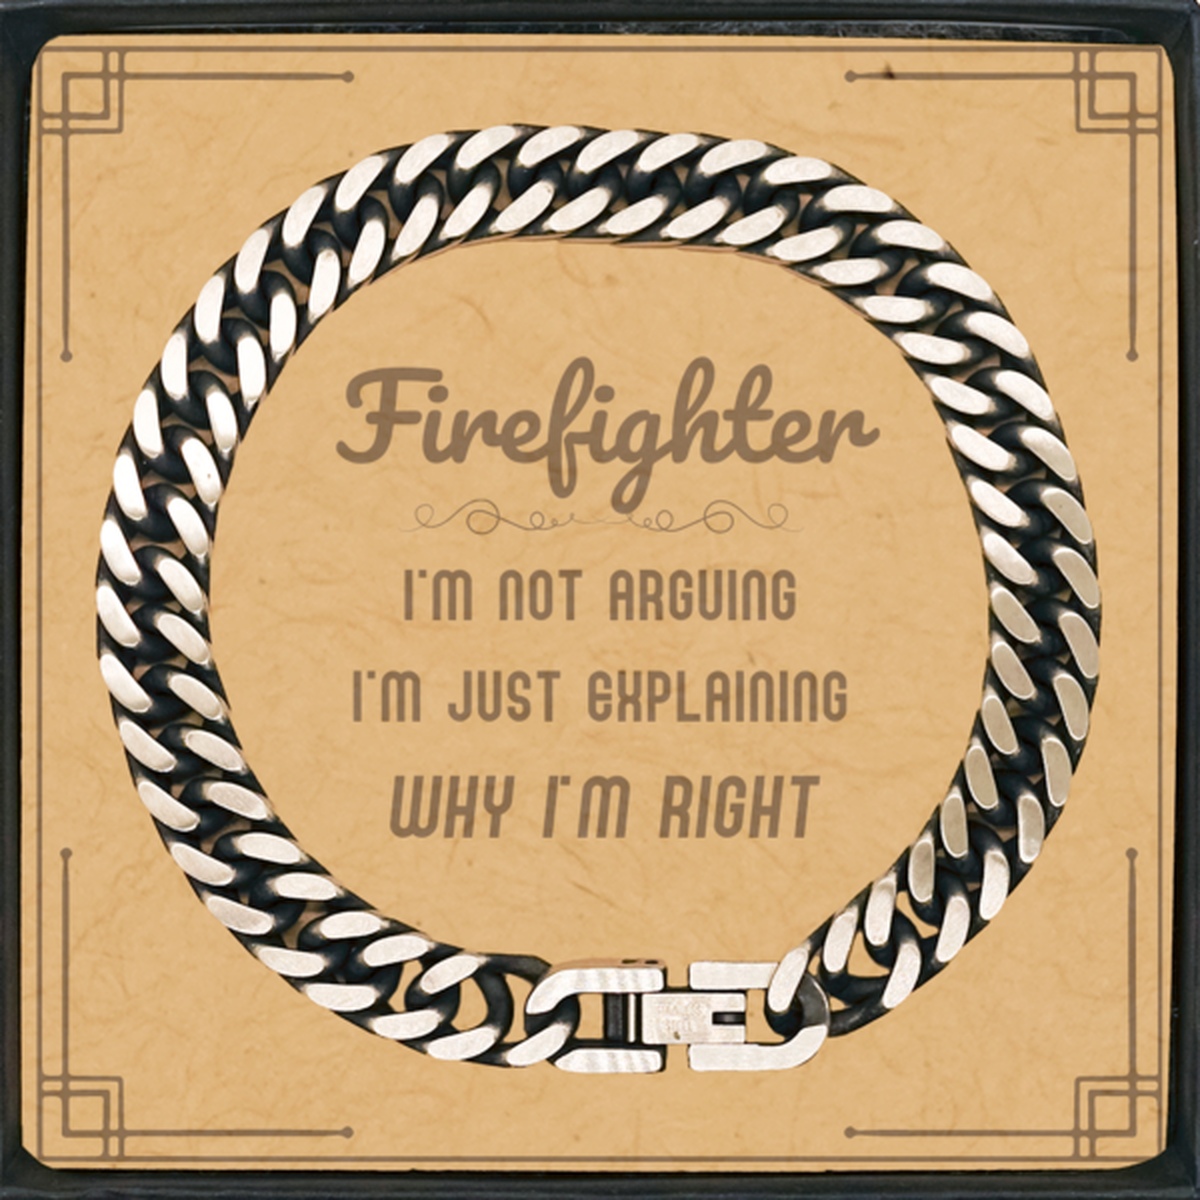 Firefighter I'm not Arguing. I'm Just Explaining Why I'm RIGHT Cuban Link Chain Bracelet, Funny Saying Quote Firefighter Gifts For Firefighter Message Card Graduation Birthday Christmas Gifts for Men Women Coworker